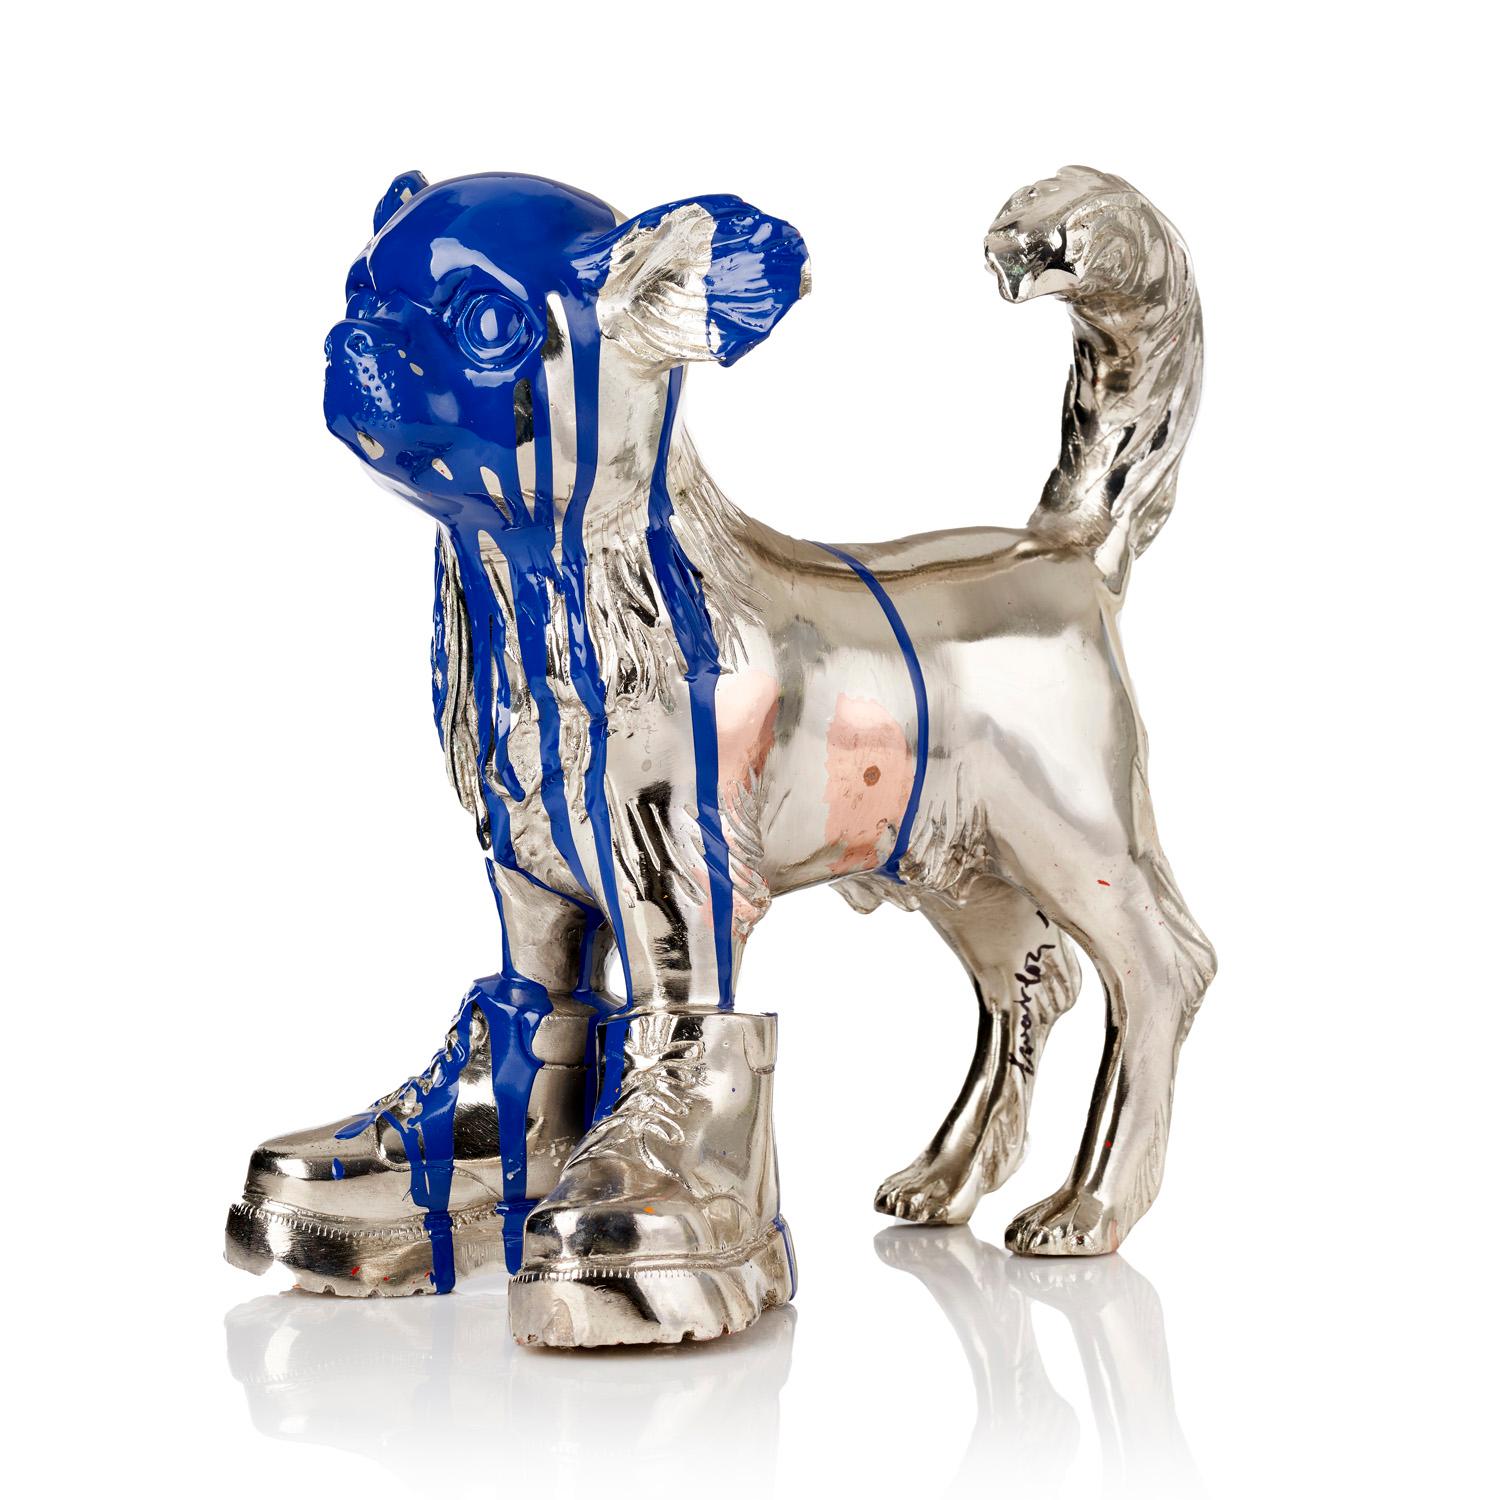 William Sweetlove Figurative Sculpture - Cloned Chihuahua with colored head blue